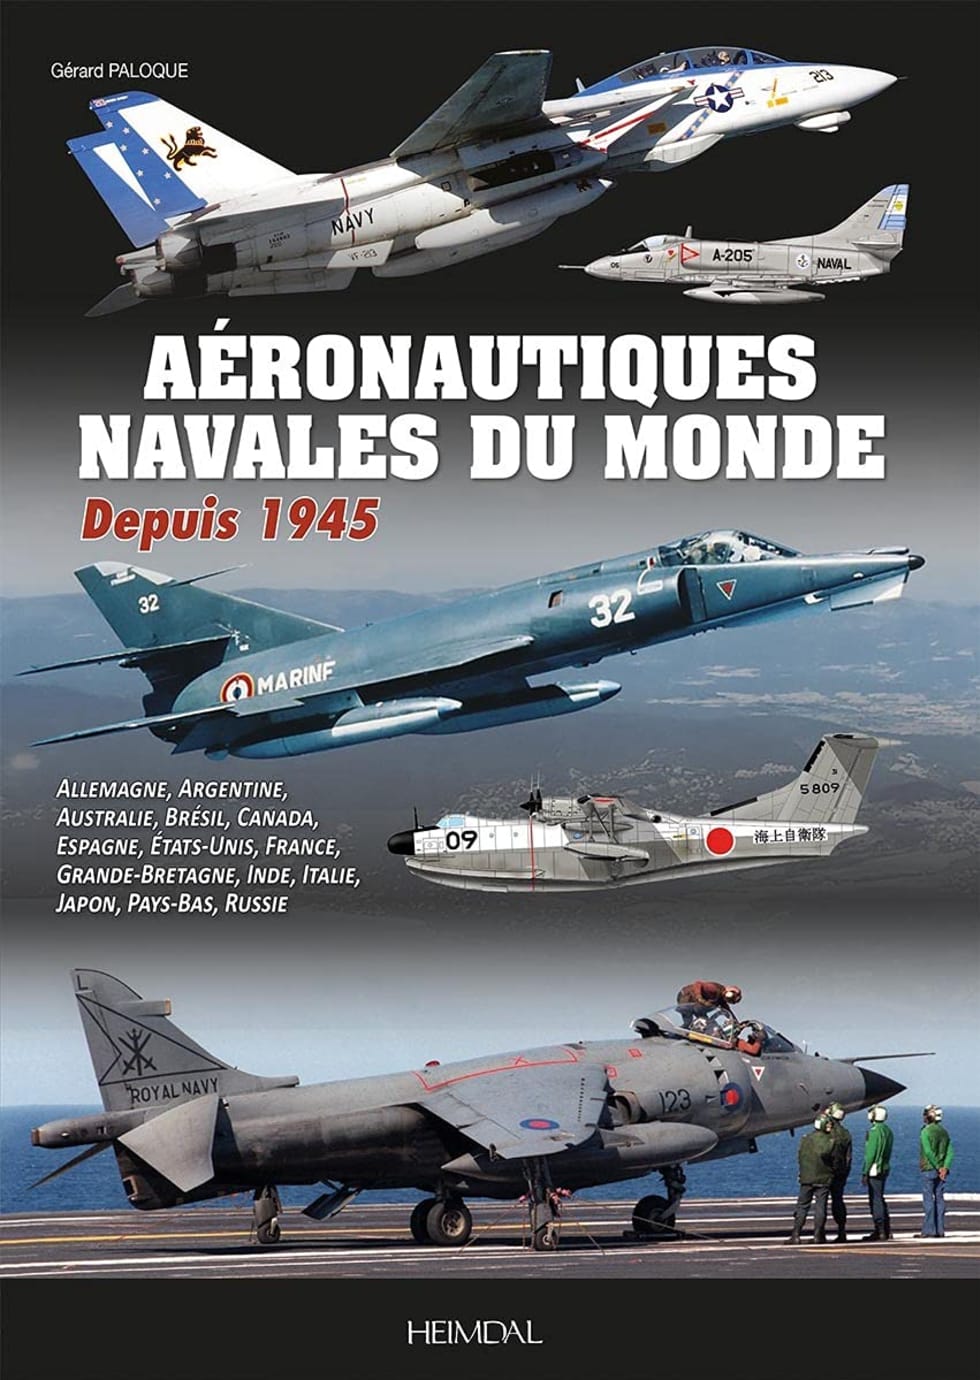 Book. “Naval Air Forces of the World, since 1945”